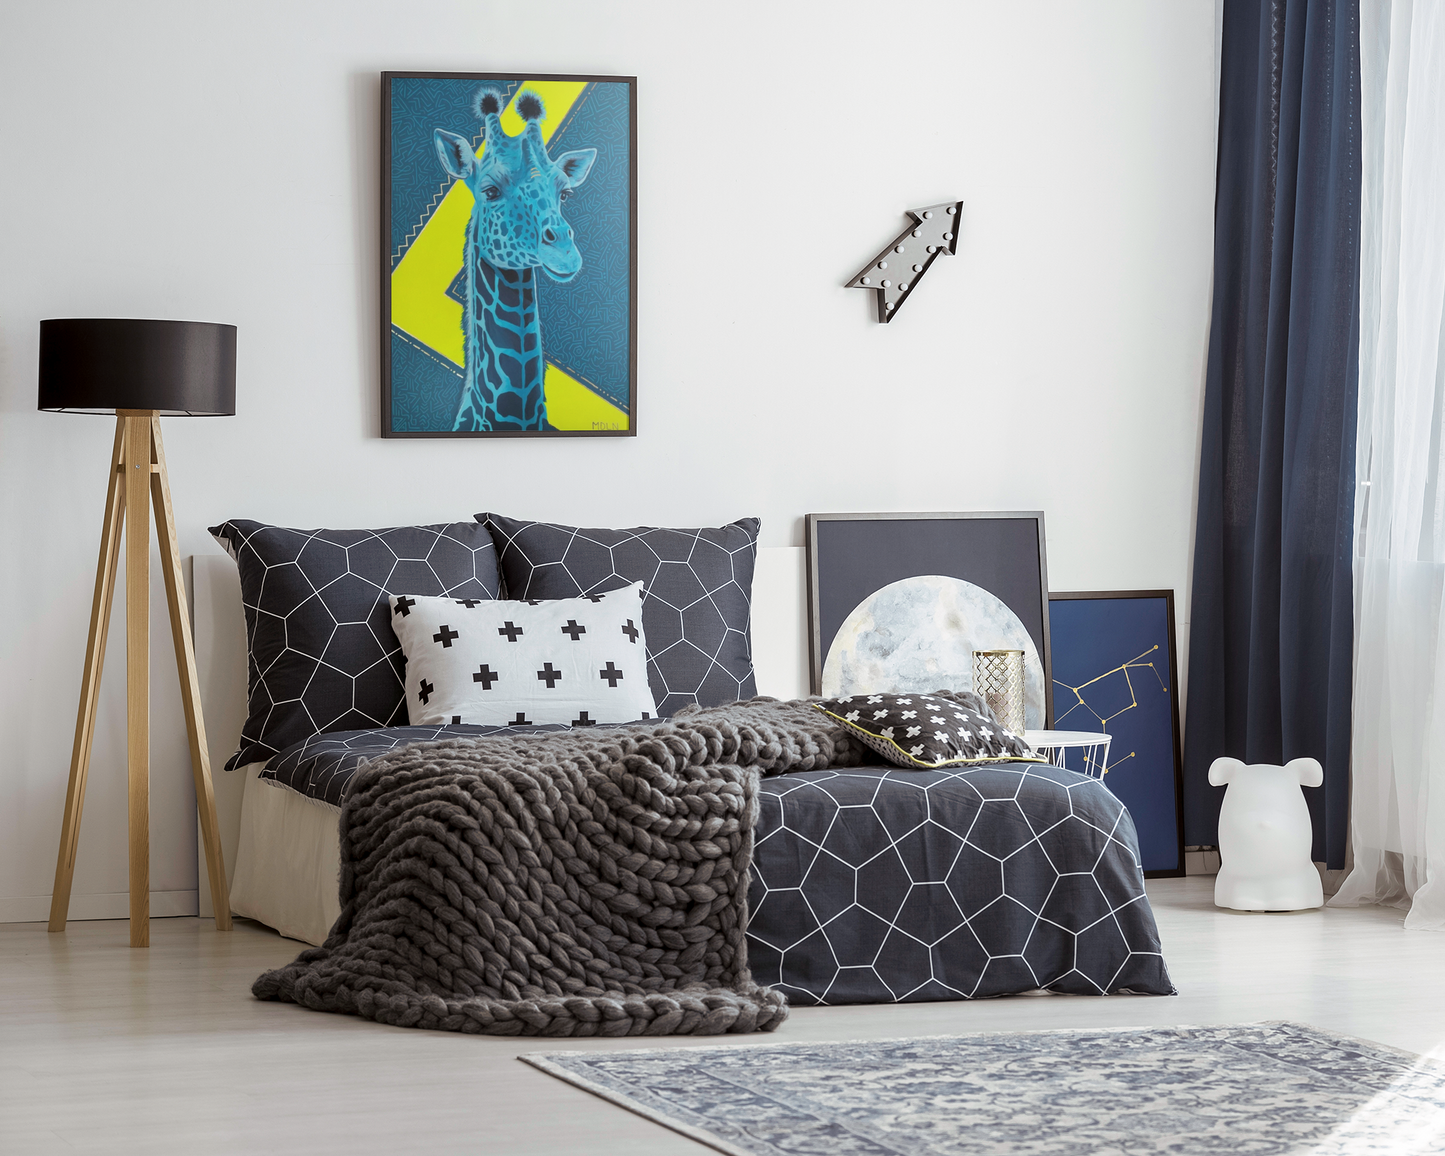 Original Acrylic painting with gold leaf of a majestic blue Giraffe Drawing with a blue and neon yellow background, framed, hanging on the wall above a bed in a kids/teenagers bedroom